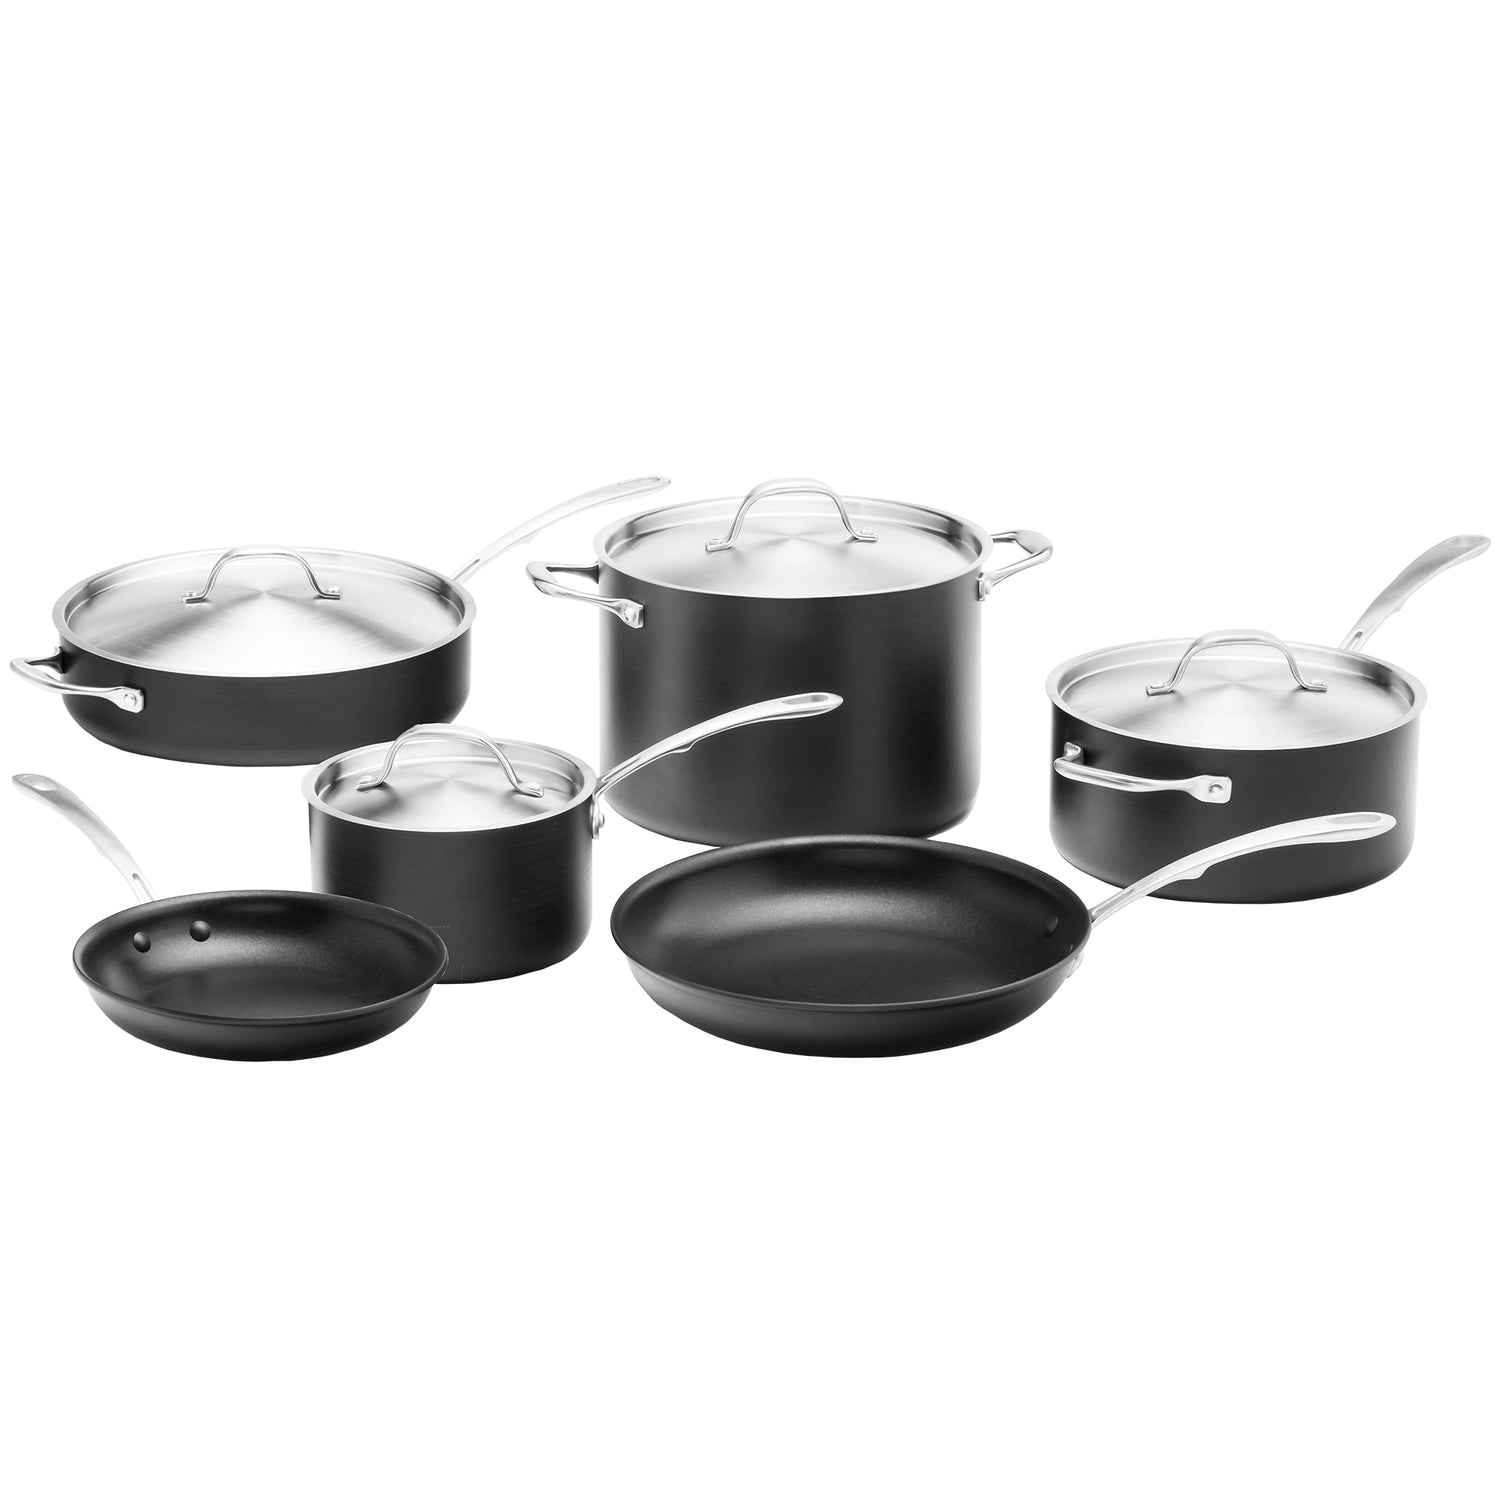 Kitchara 10 - Piece Stainless Steel (18/10) Cookware Set